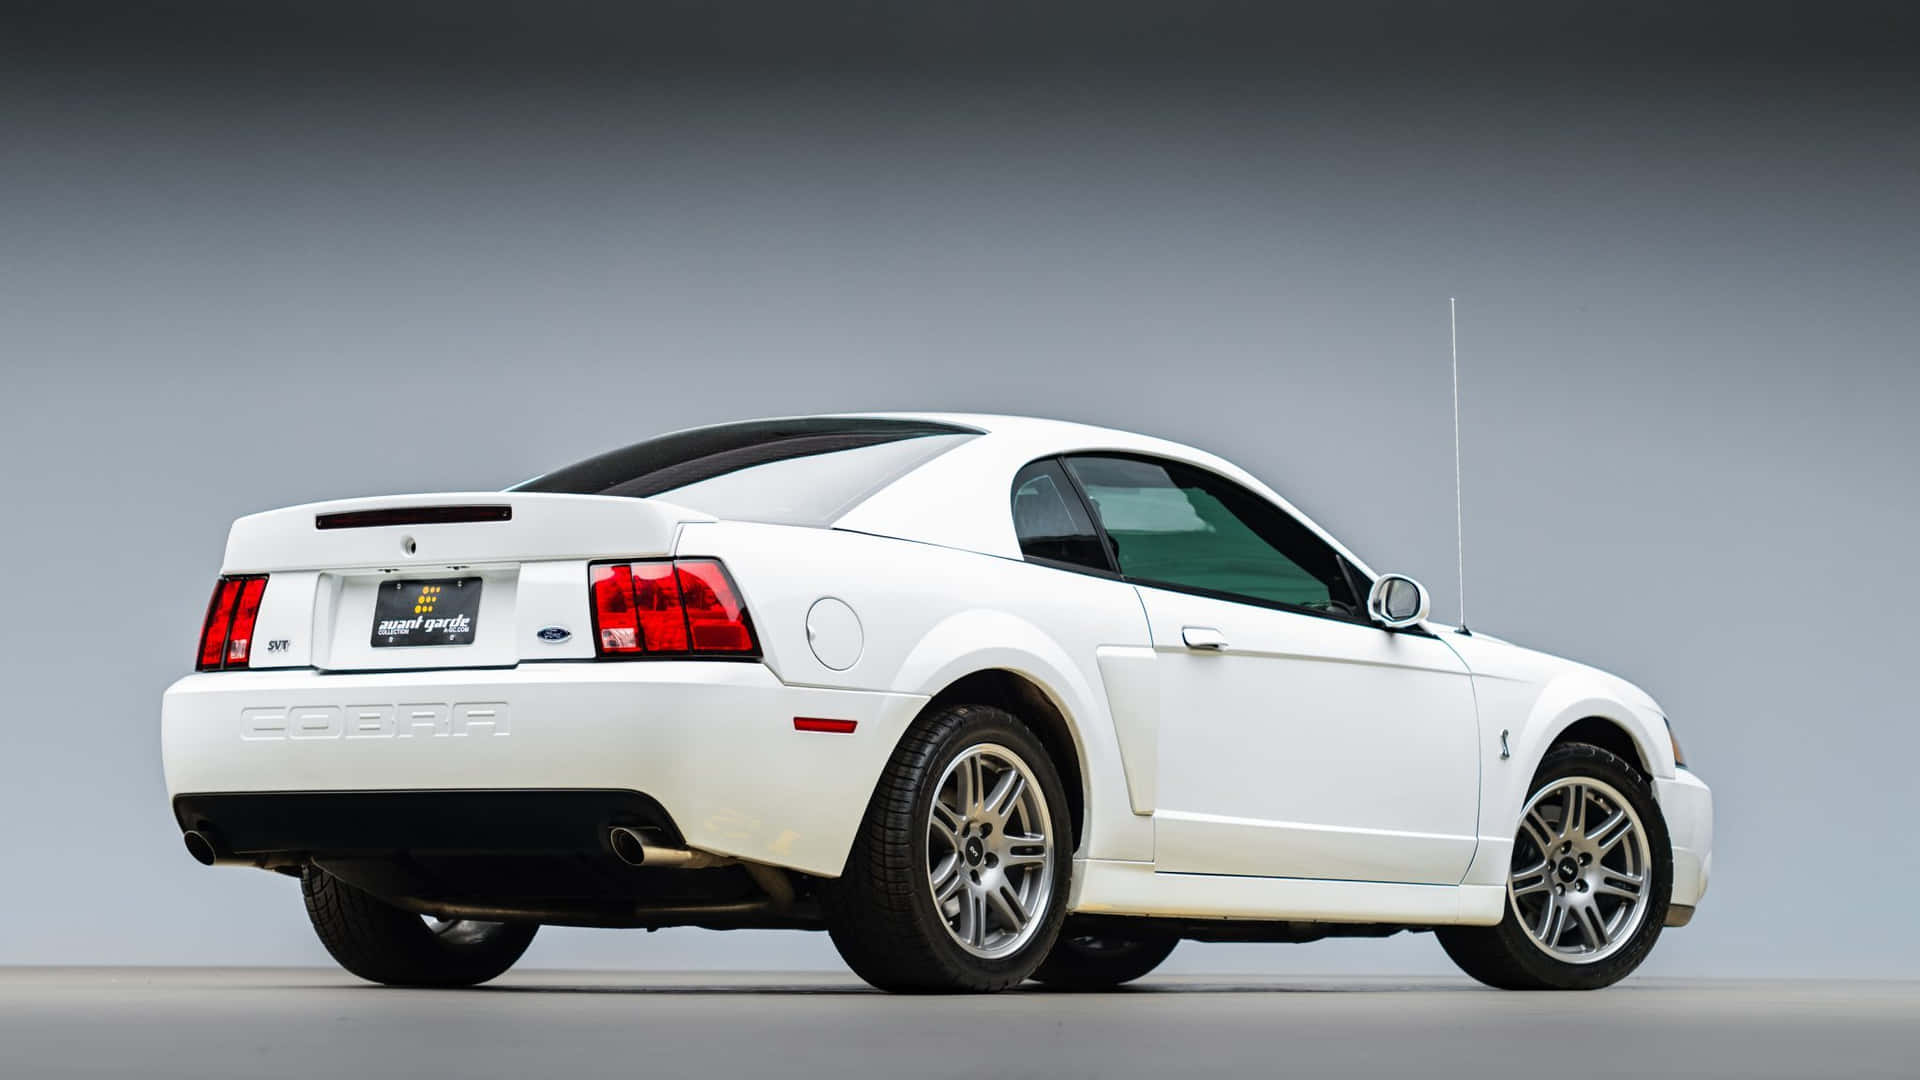 Powerful Ford Mustang Svt Cobra Unleashed Wallpaper